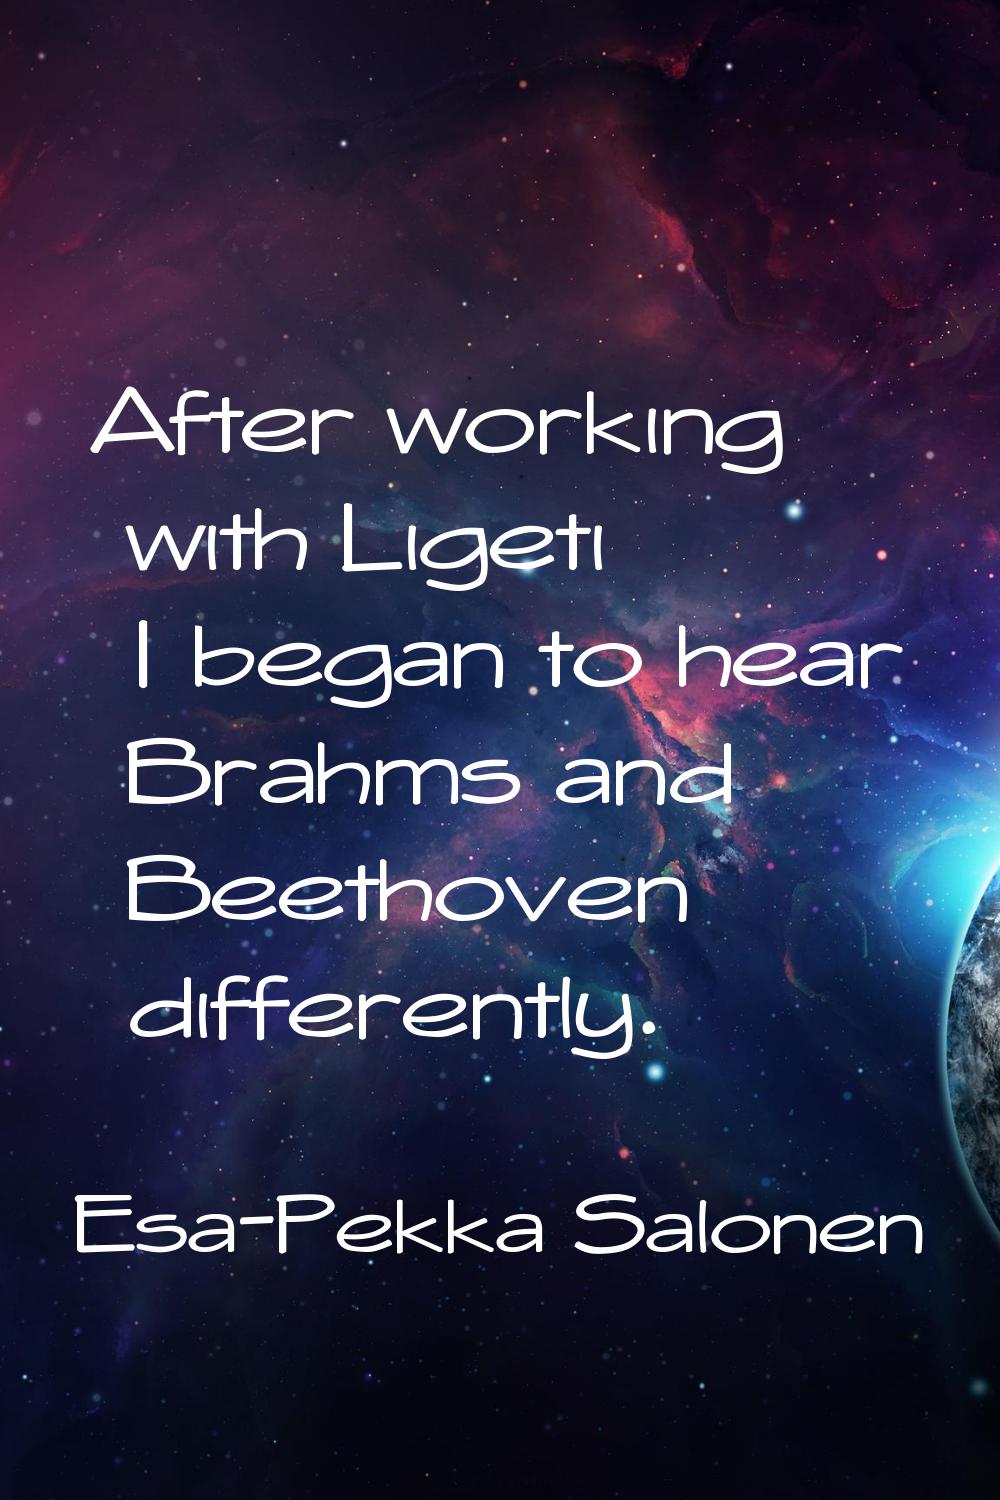 After working with Ligeti I began to hear Brahms and Beethoven differently.